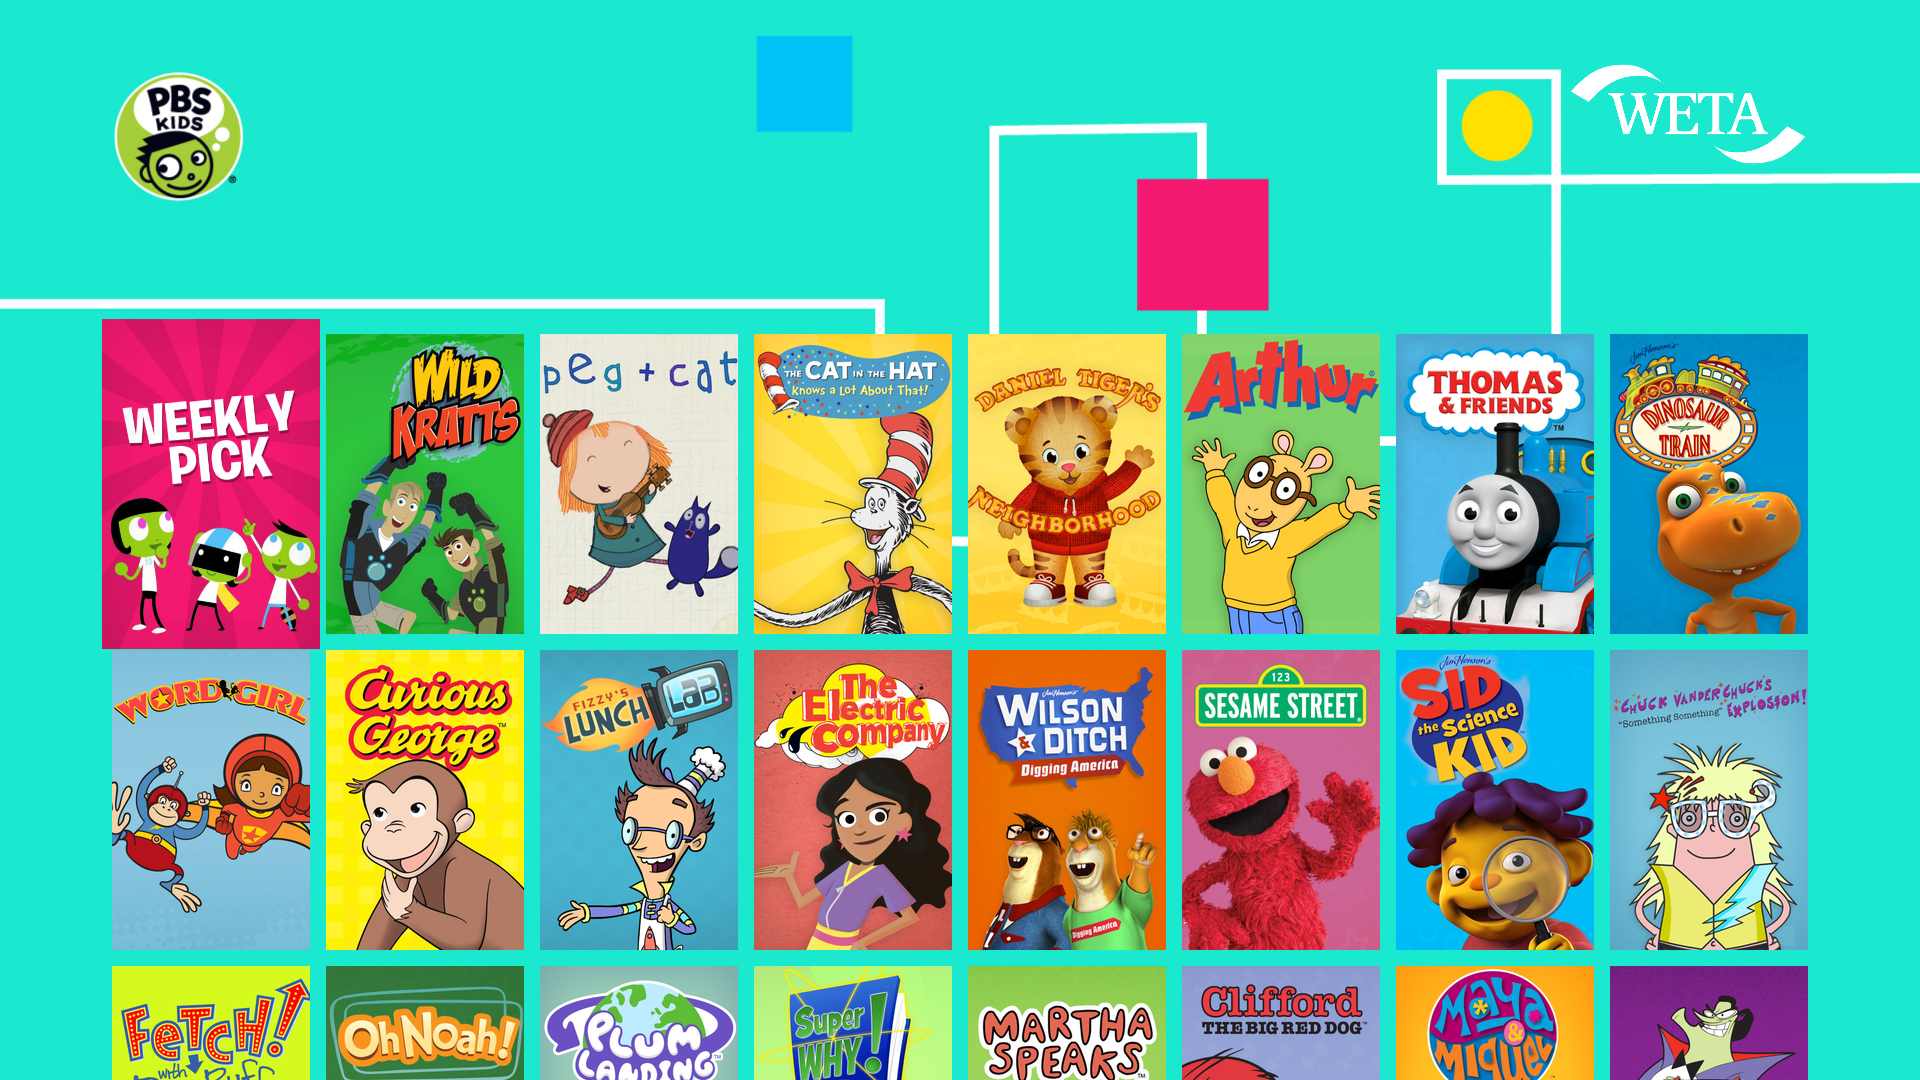 Pbs Kids Pbs Kids Games Pbs Kids Kids Shows Images And Photos Finder